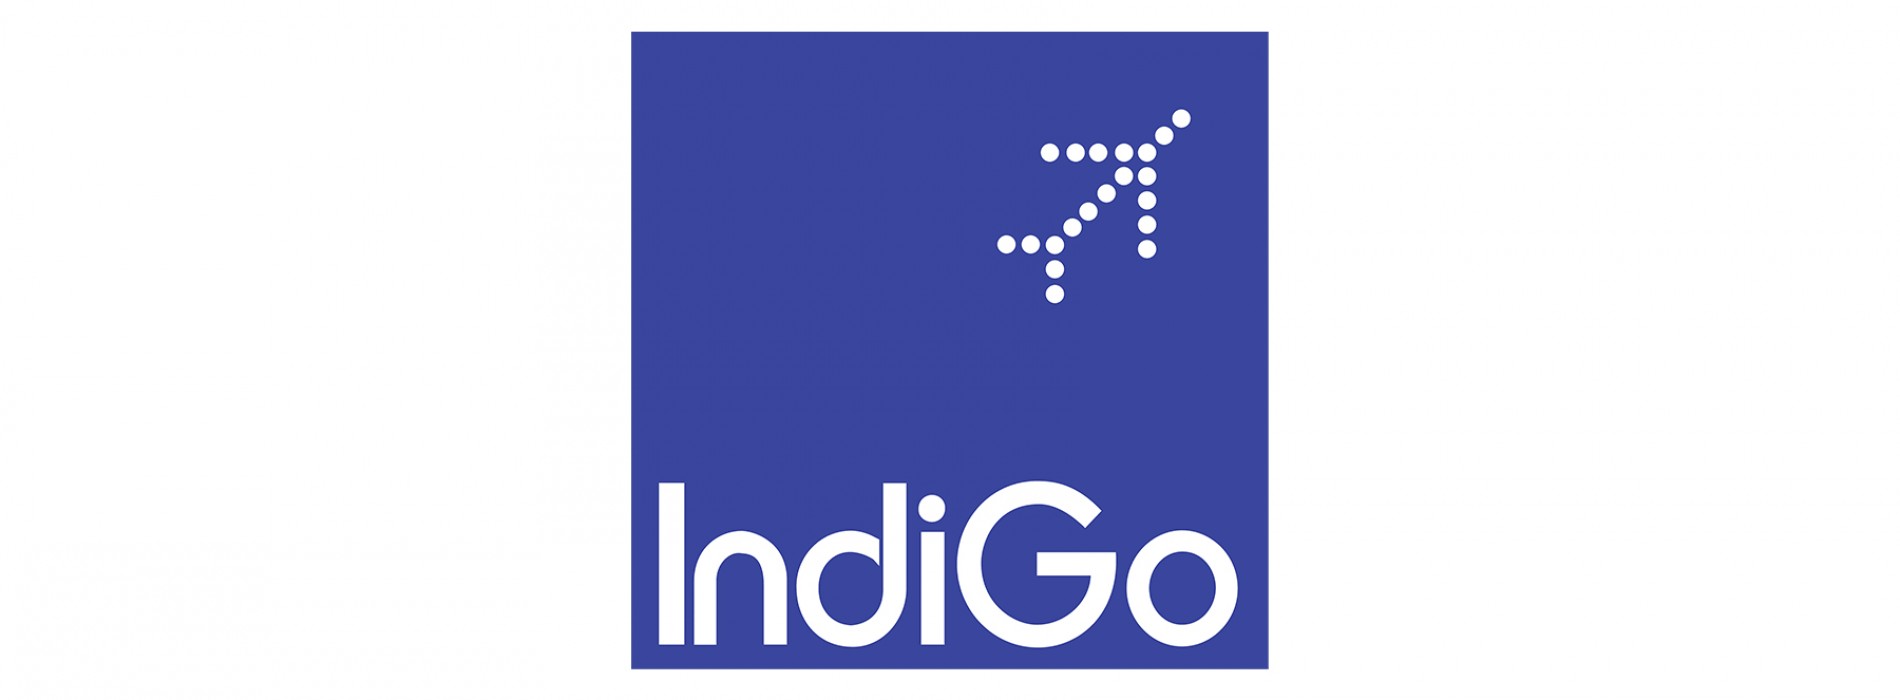 IndiGo enters the wide-body space with an order for 30 Firm Airbus A350-900 aircraft